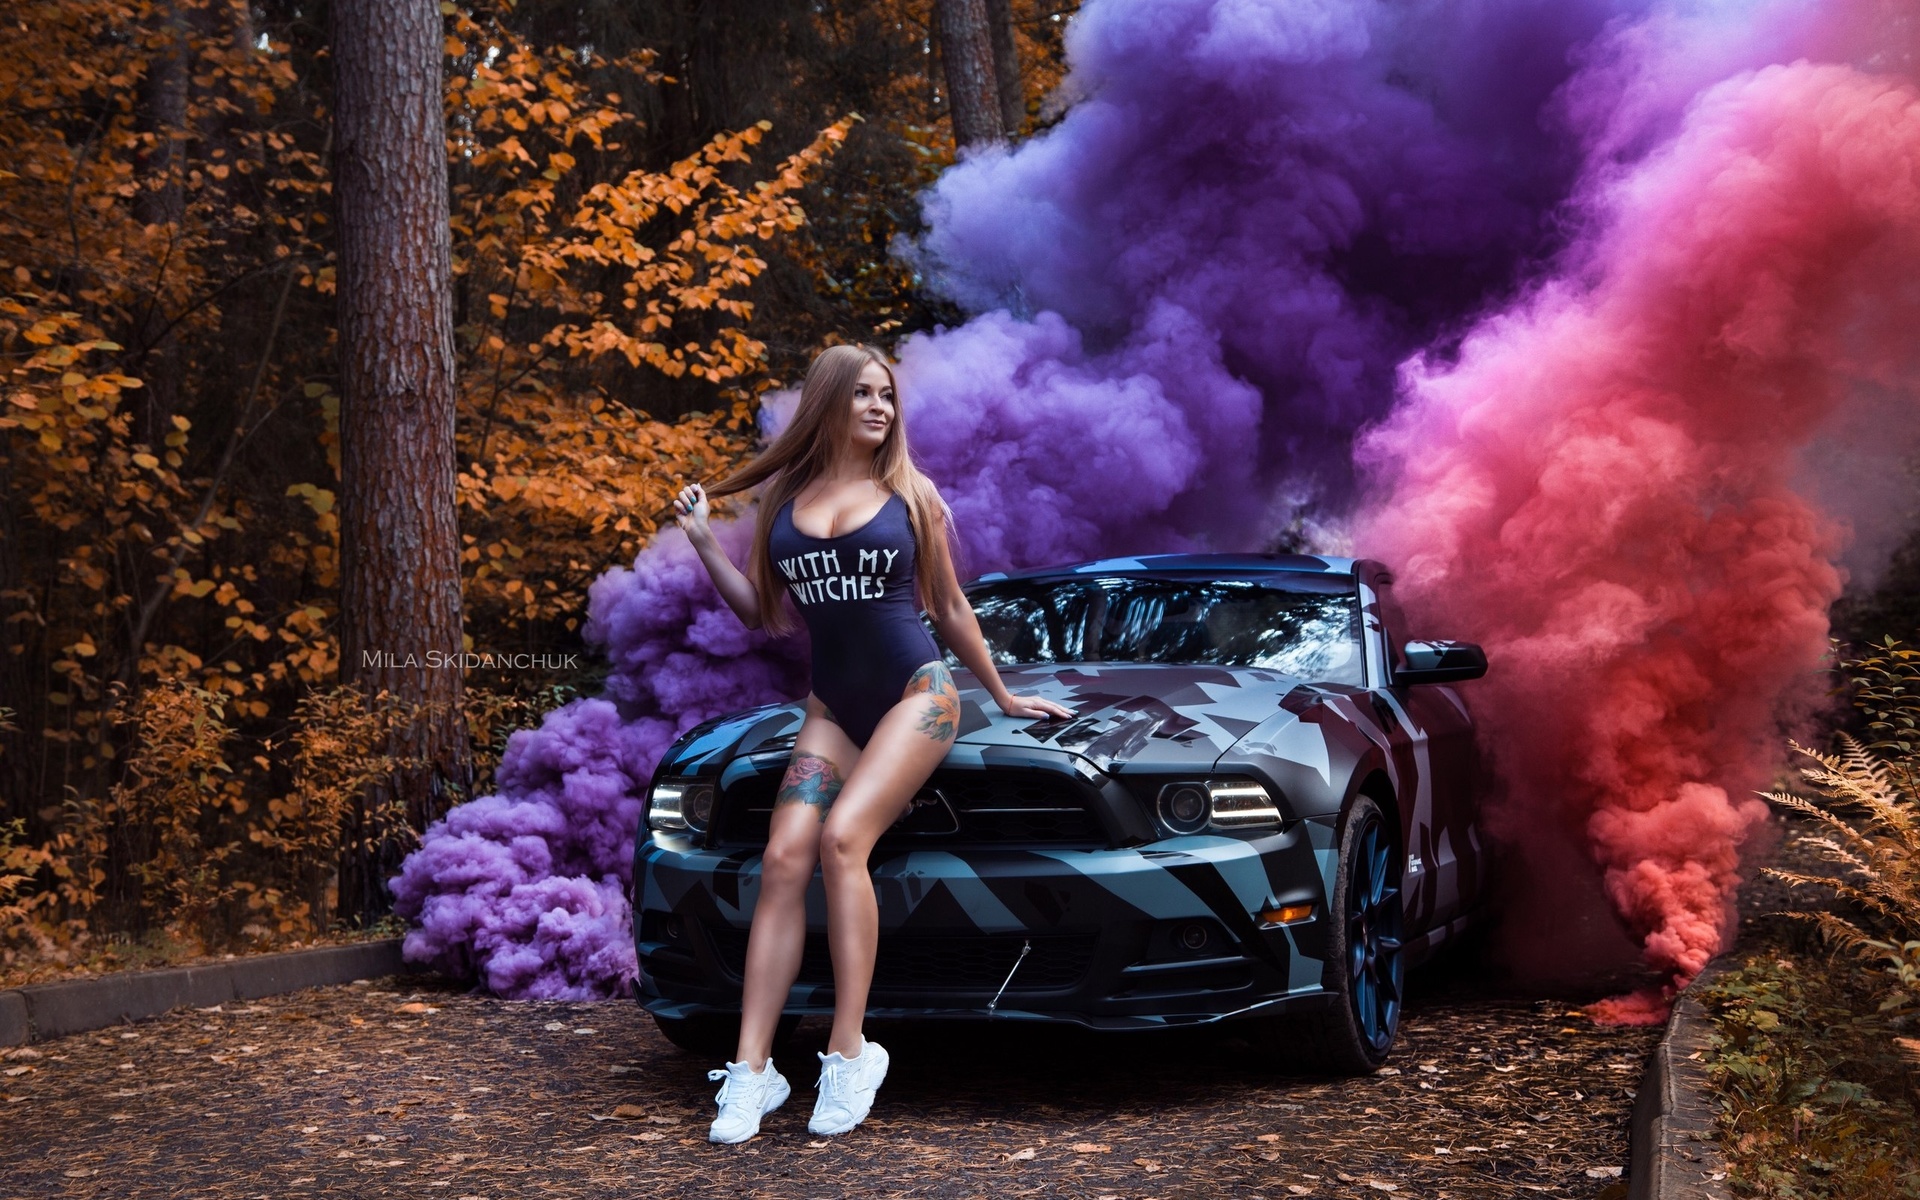 women, monokinis, tanned, tattoo, long hair, smoke, sneakers, women outdoors, women with cars, smiling, looking away, painted nails, trees